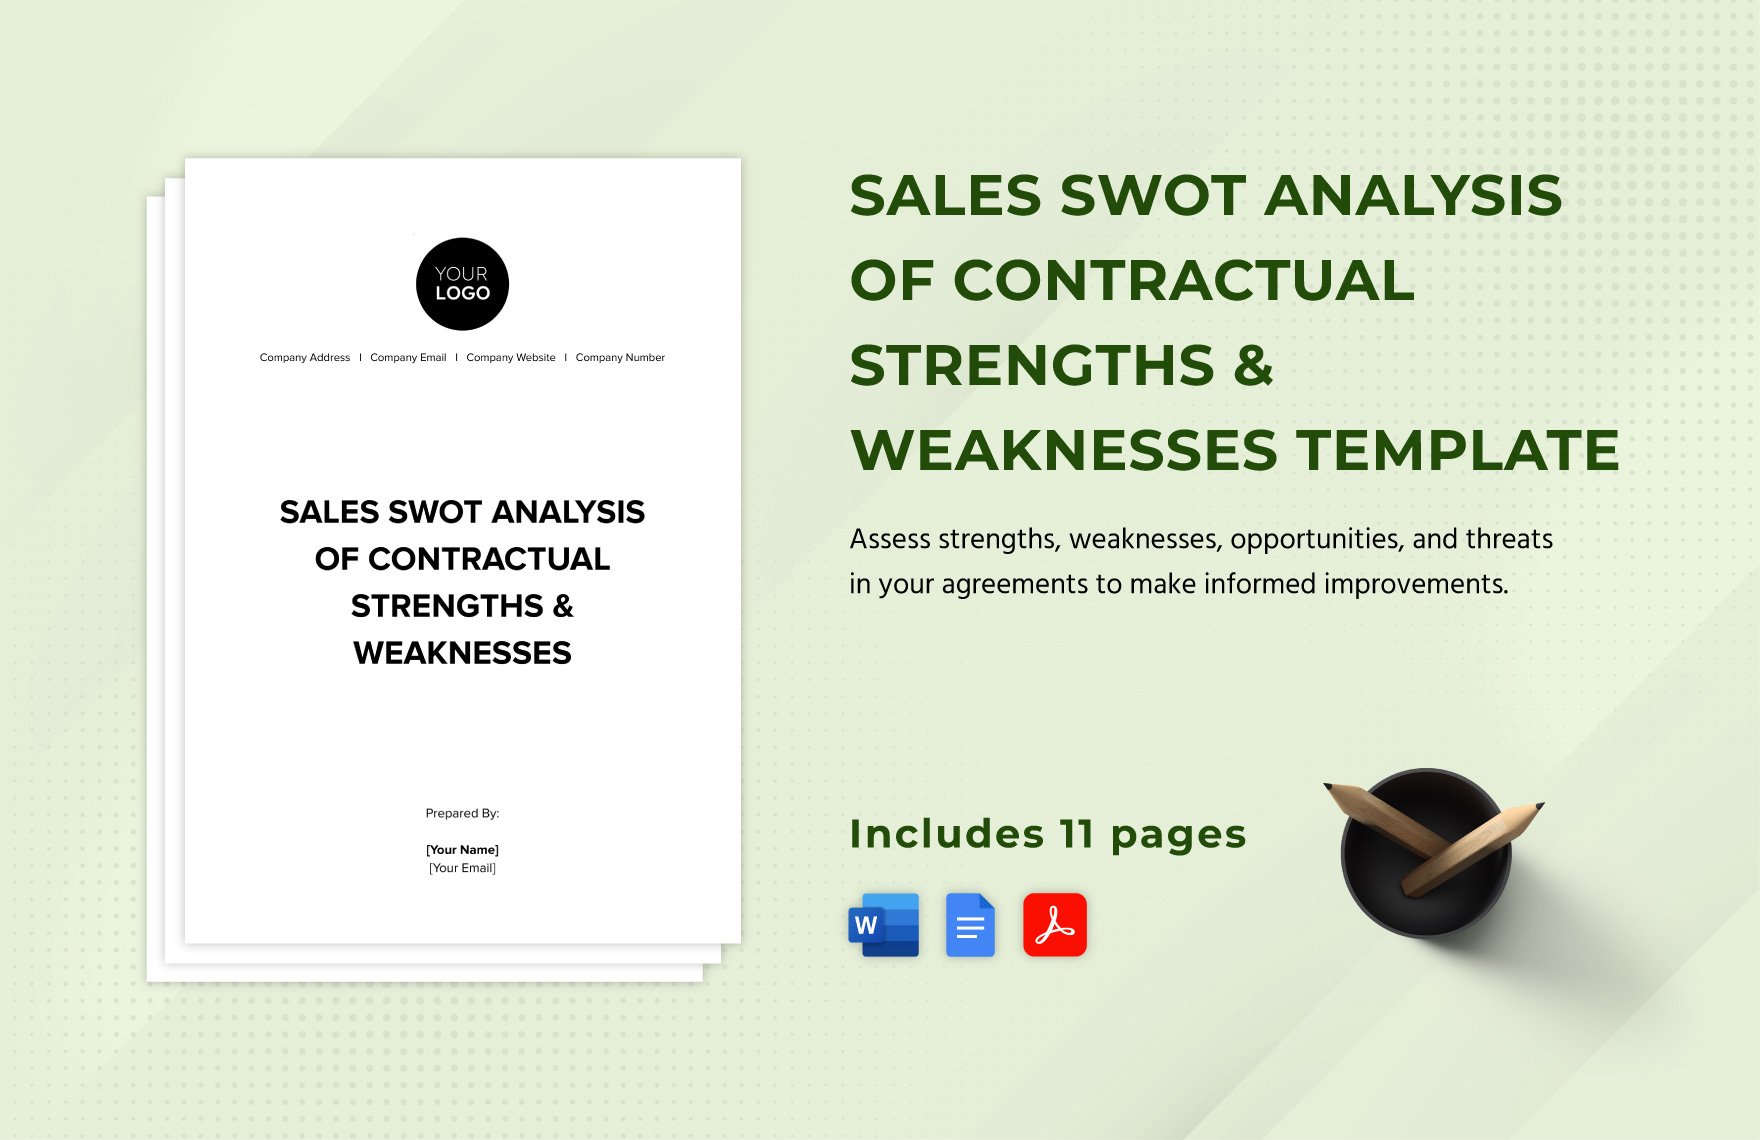 Sales SWOT Analysis of Contractual Strengths & Weaknesses Template